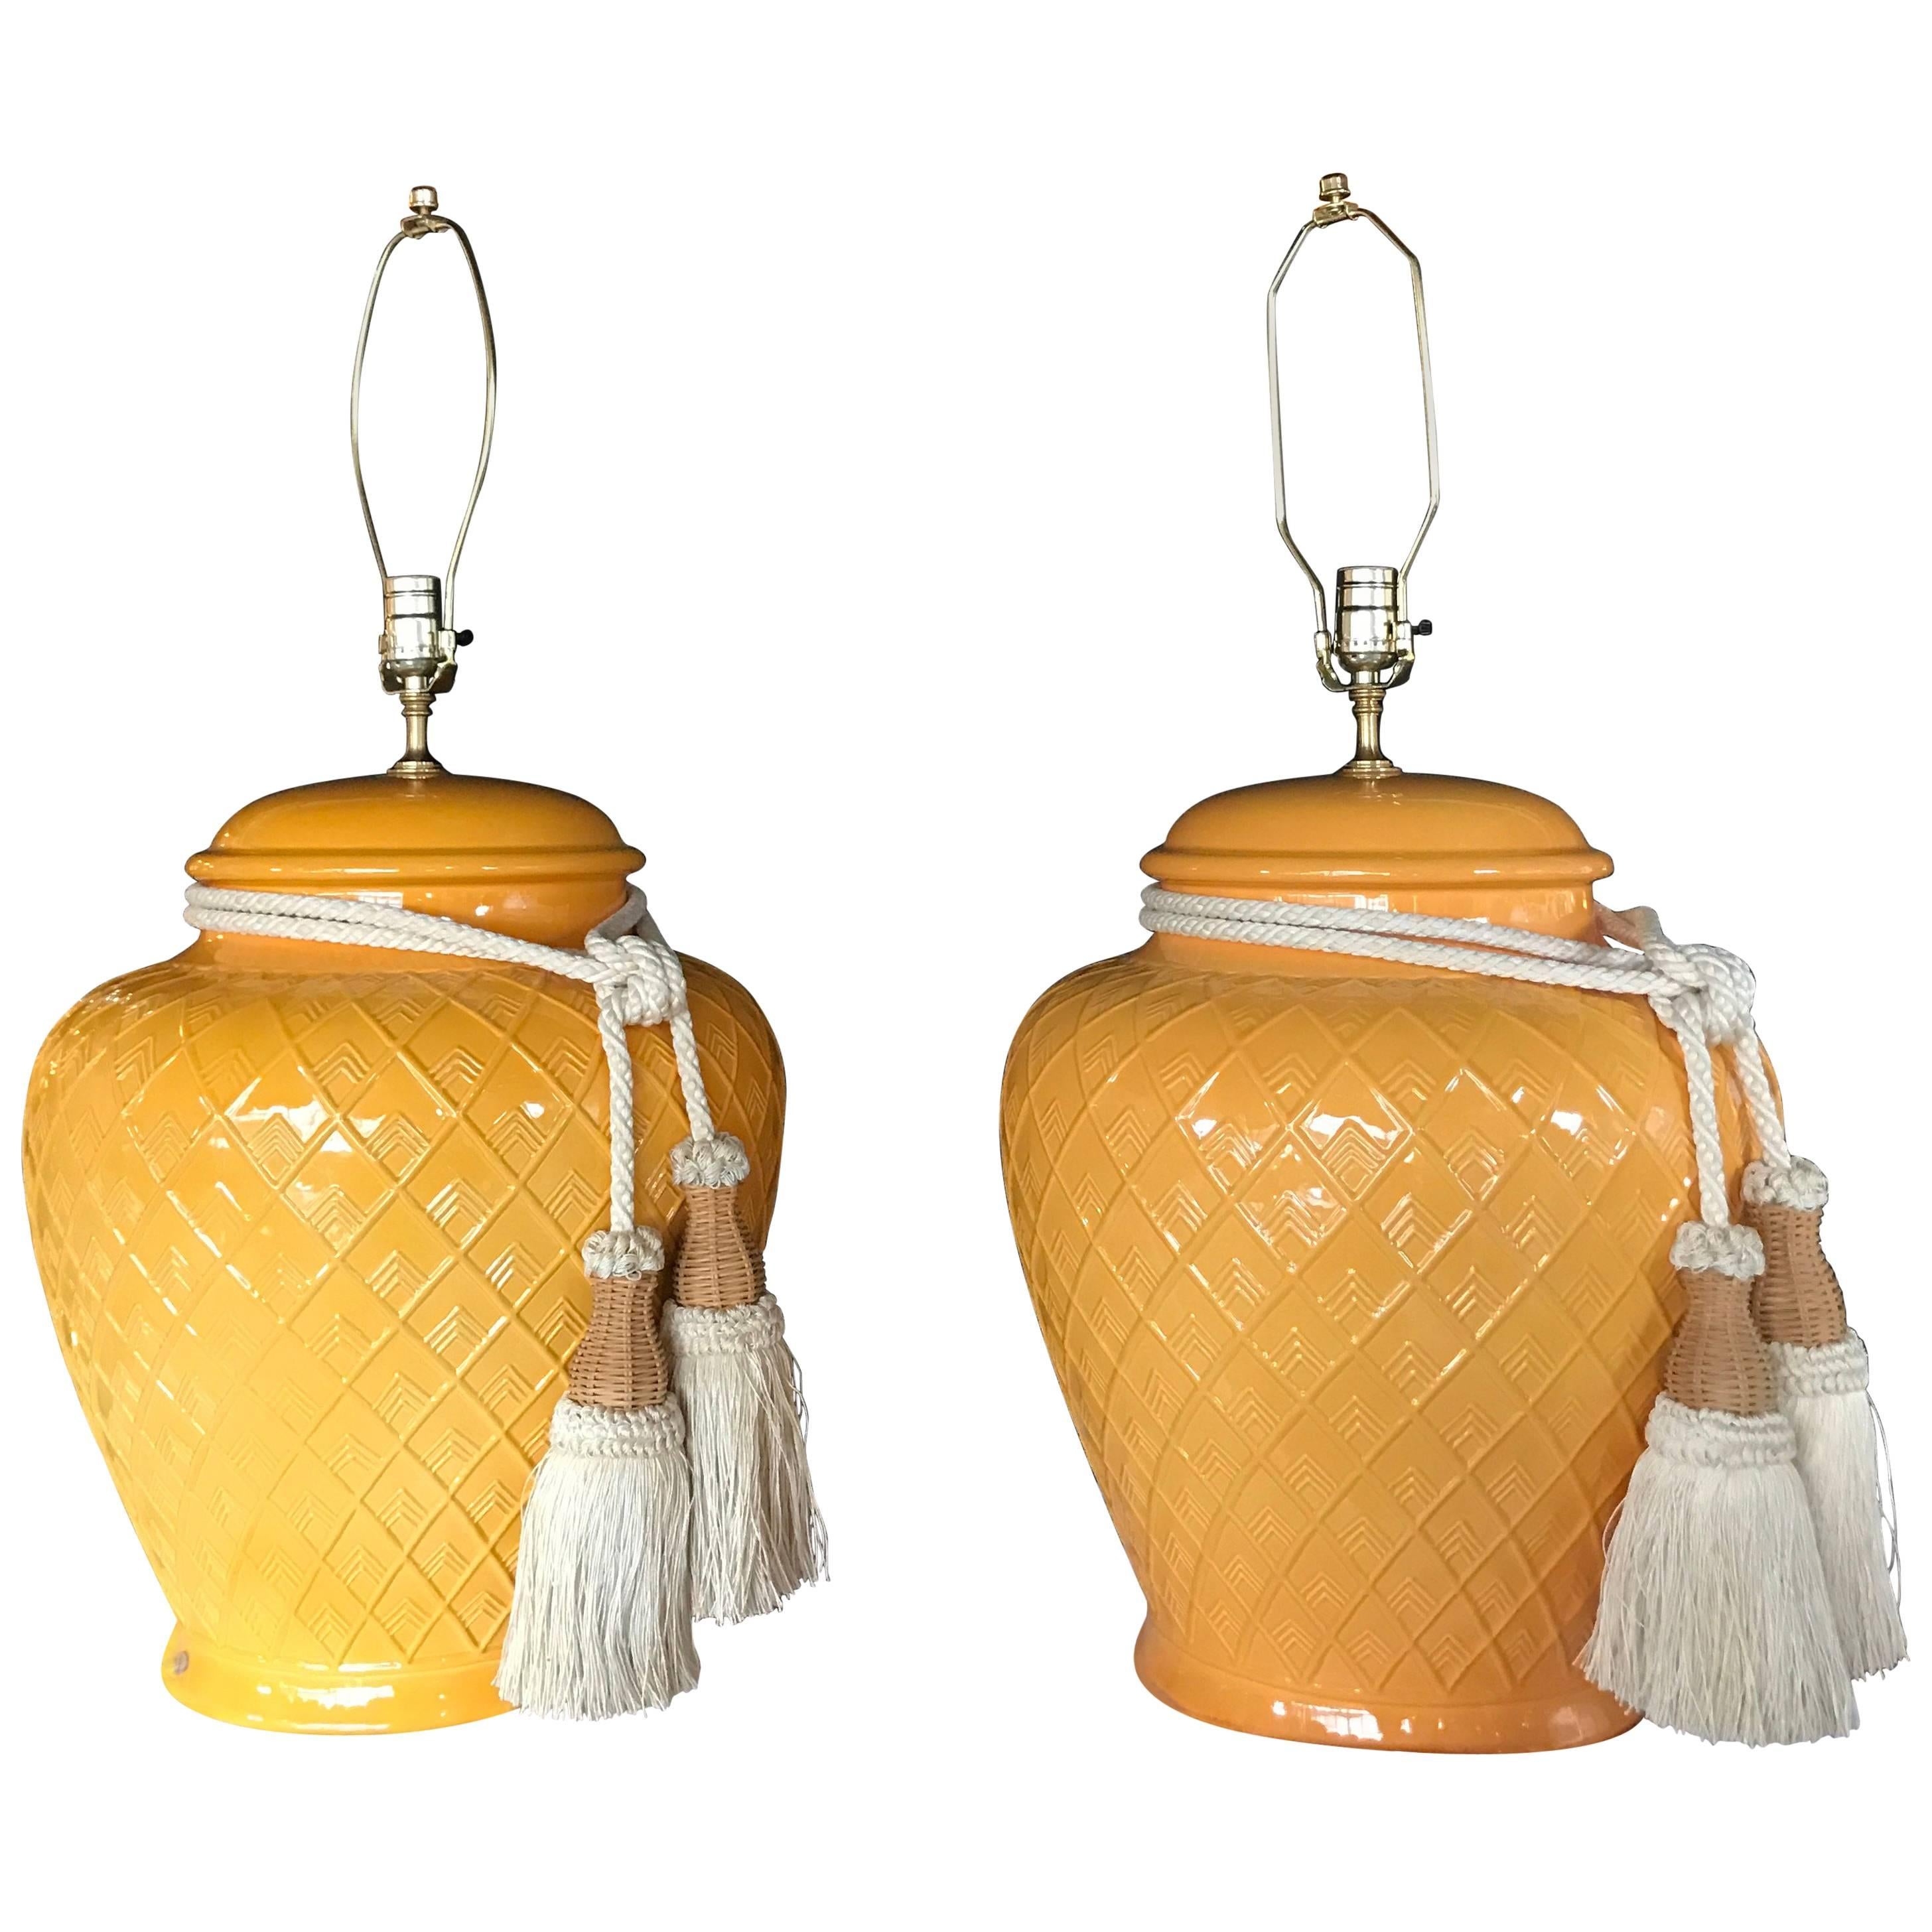 Pair of Yellow Glazed Ceramic Jardinière Lidded Vases Mounted for Lamps